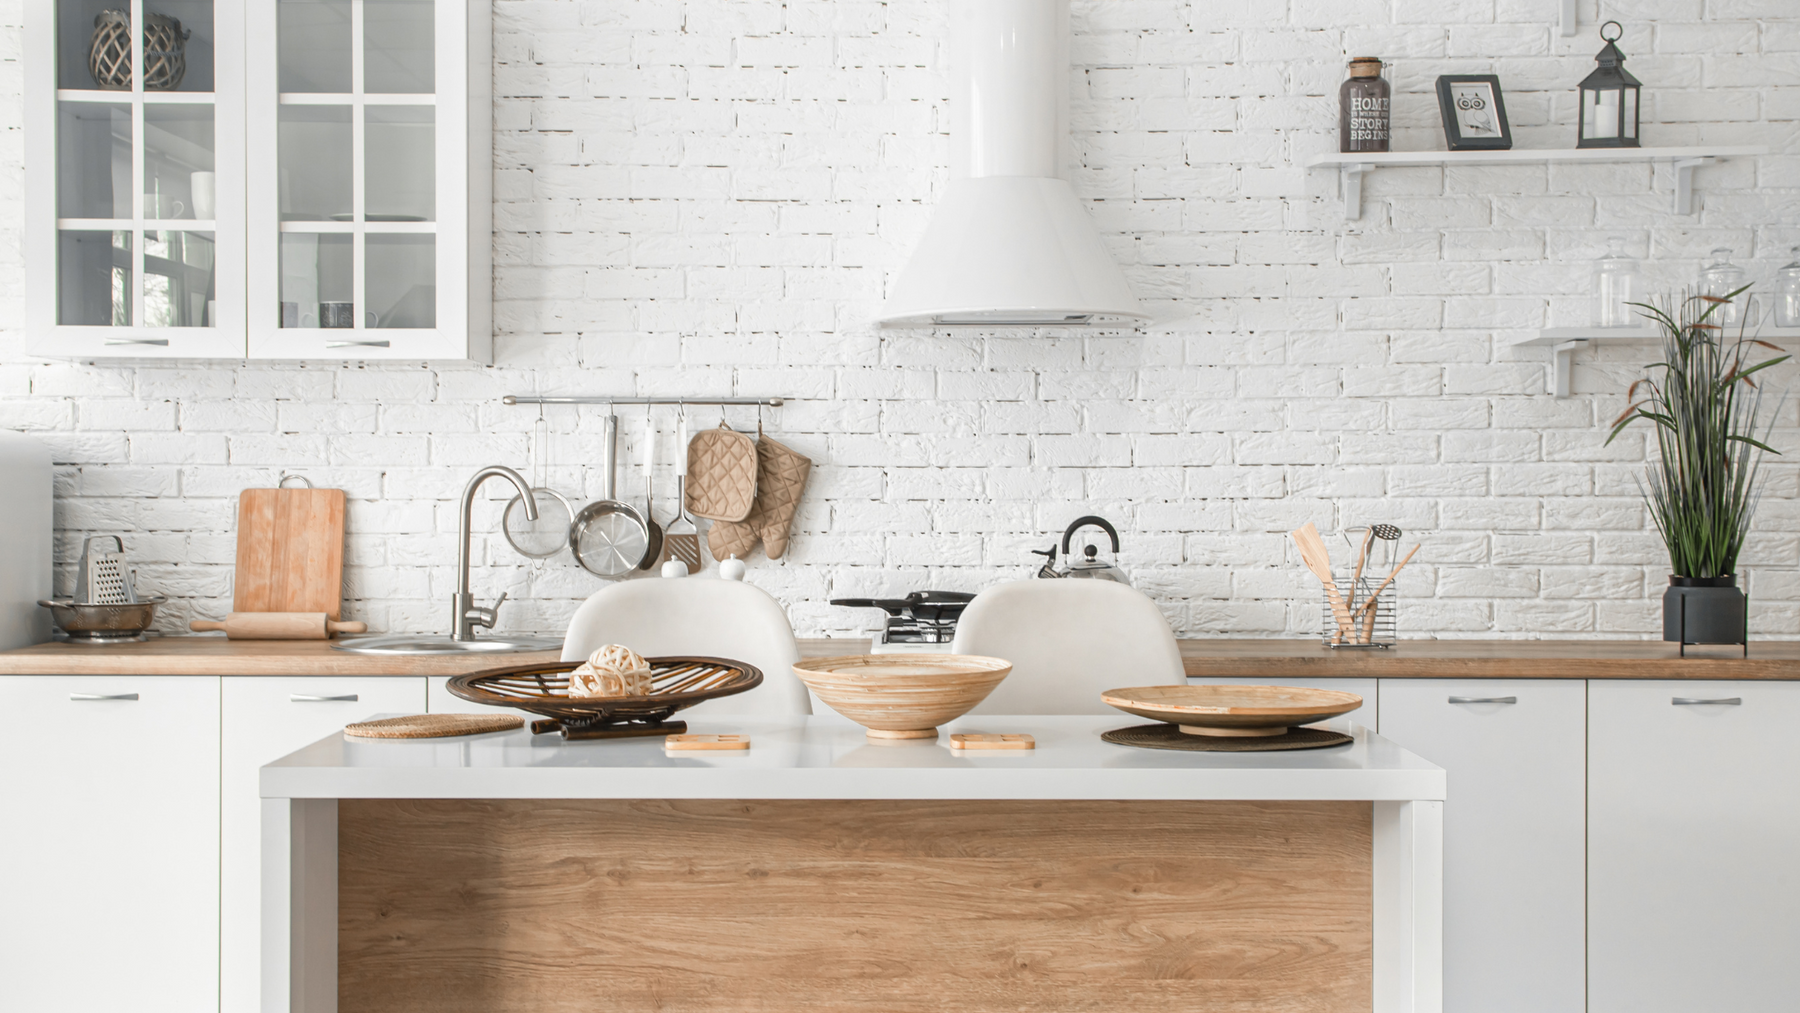 The Charm of Scandinavian Style Kitchens